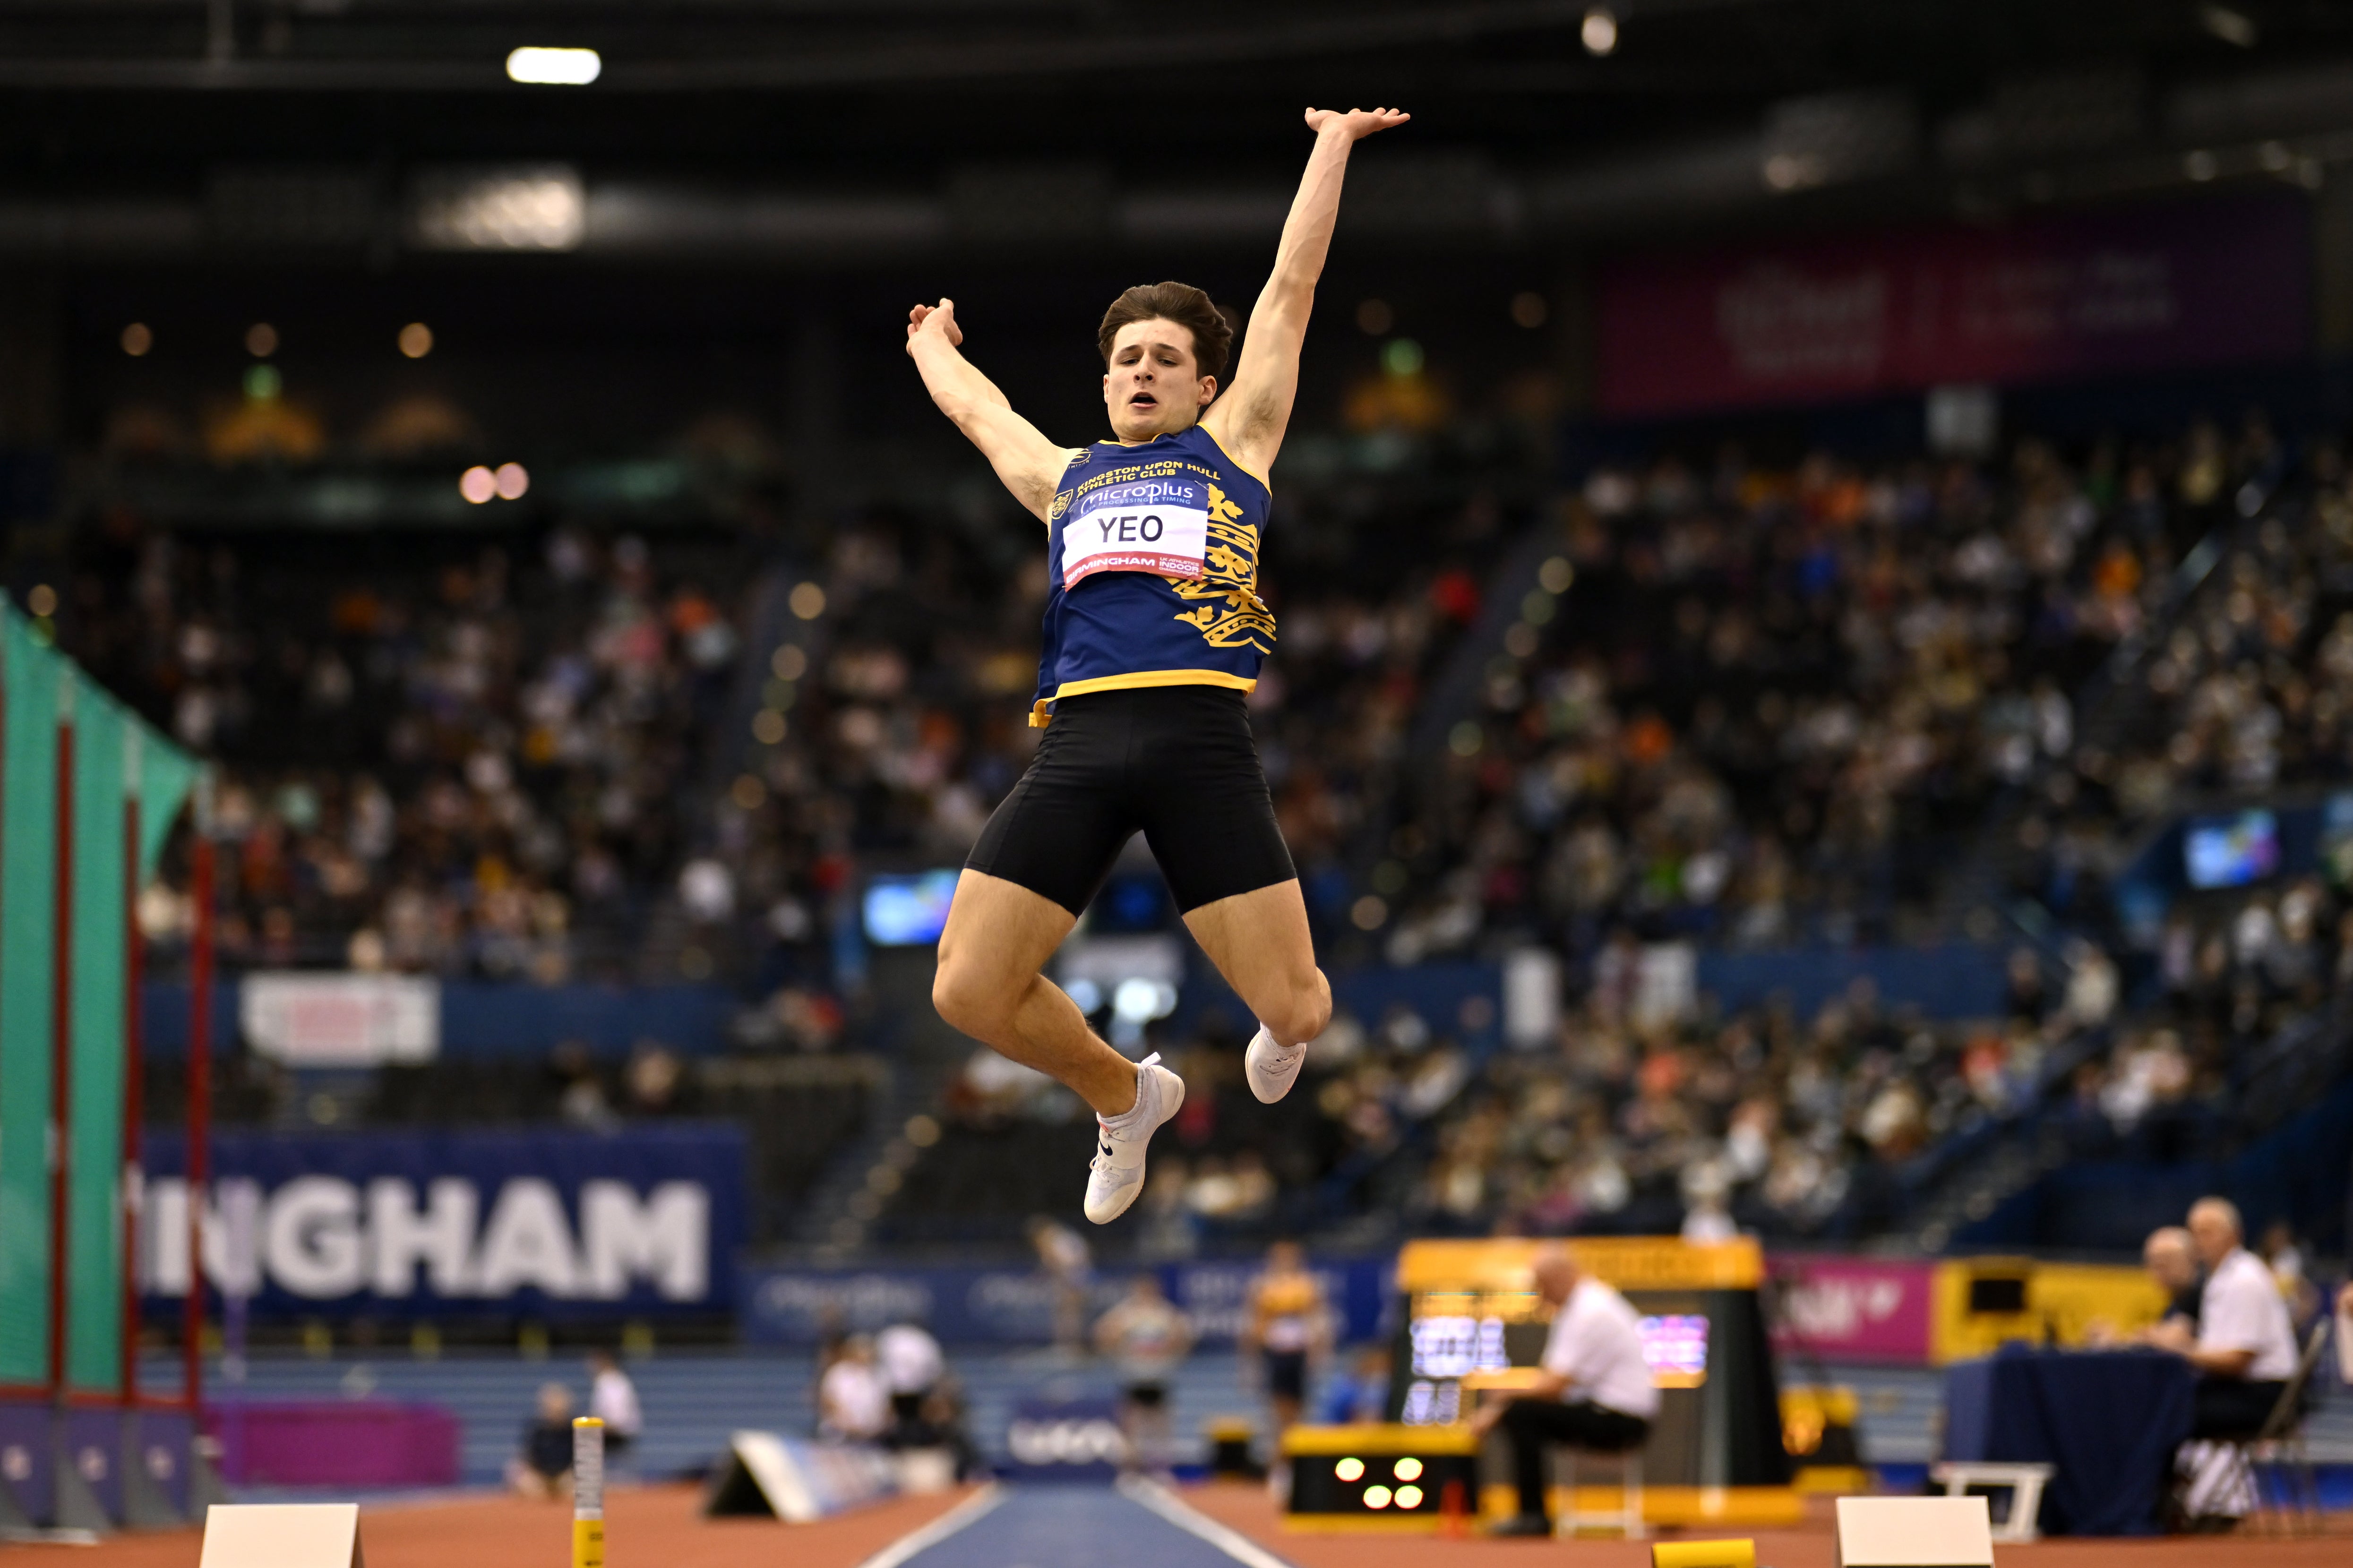 Britain’s Archie Yeo competes at the UK Indoor Championships in Birmingham last week